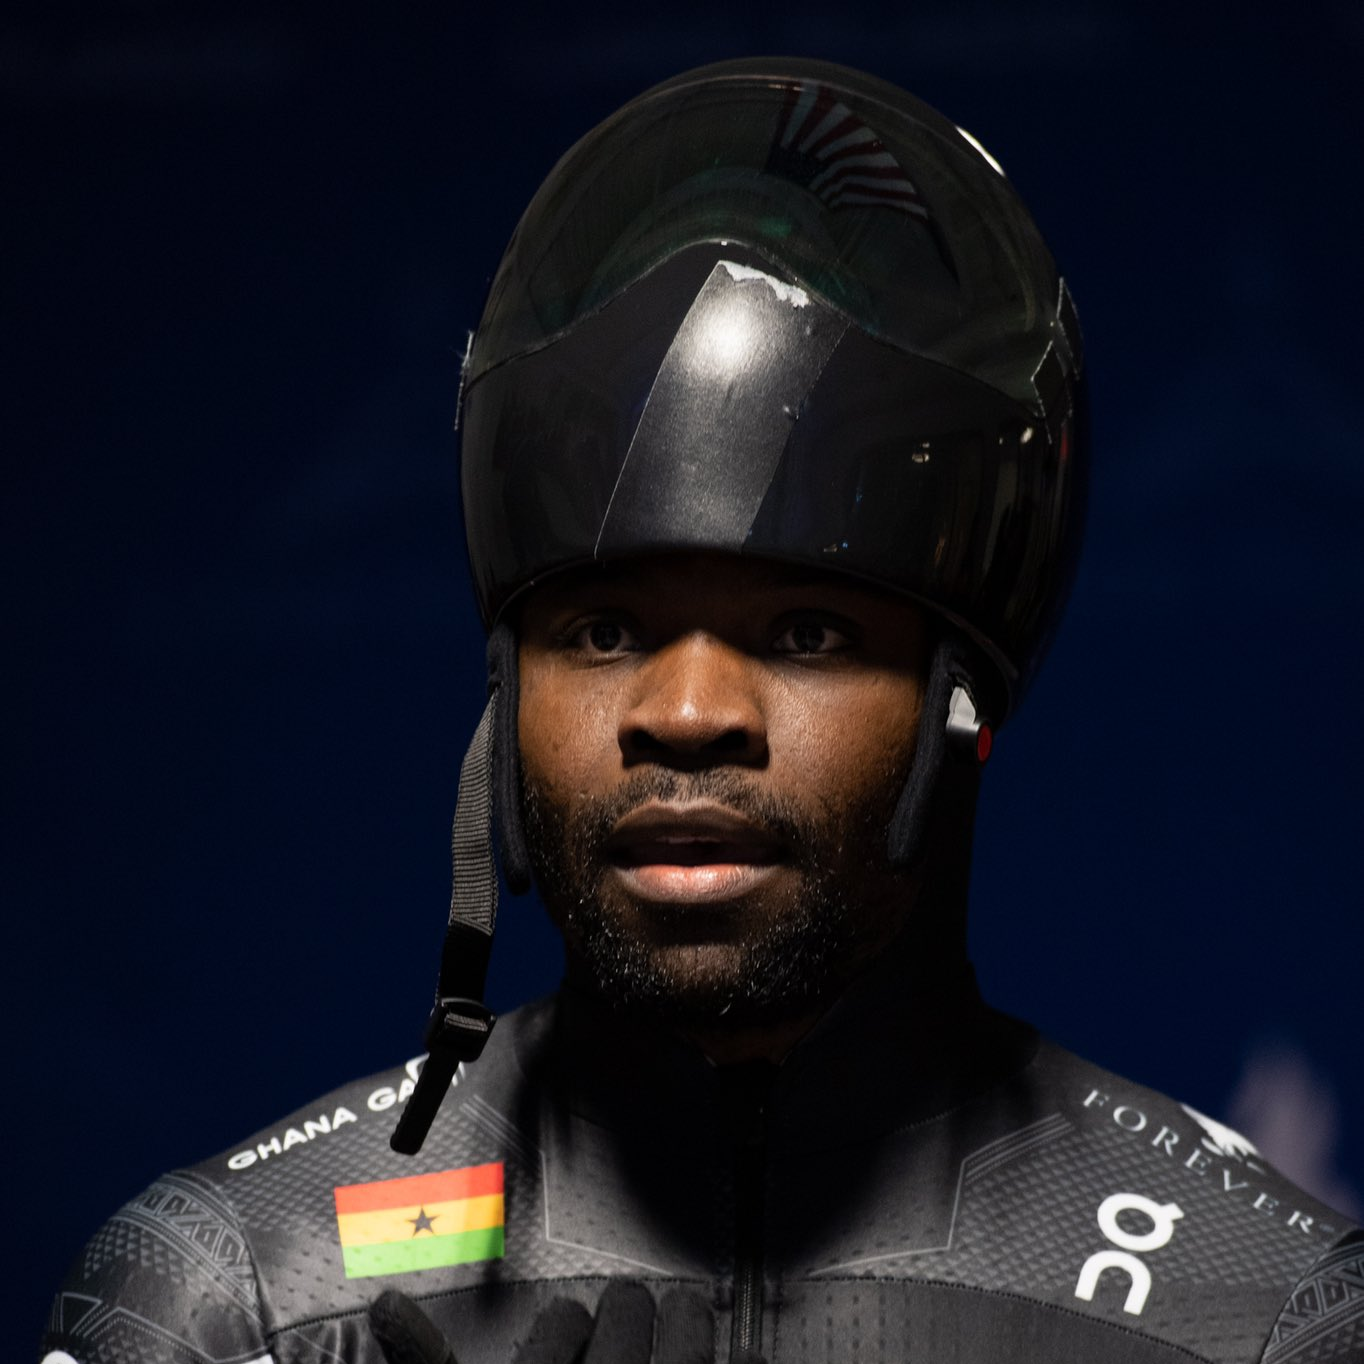 AKWASI FRIMPONG - The First African Athlete in History to Earn a Top 6 Podium Finish at a Wintersport World Championships Event - African Leaders Magazine